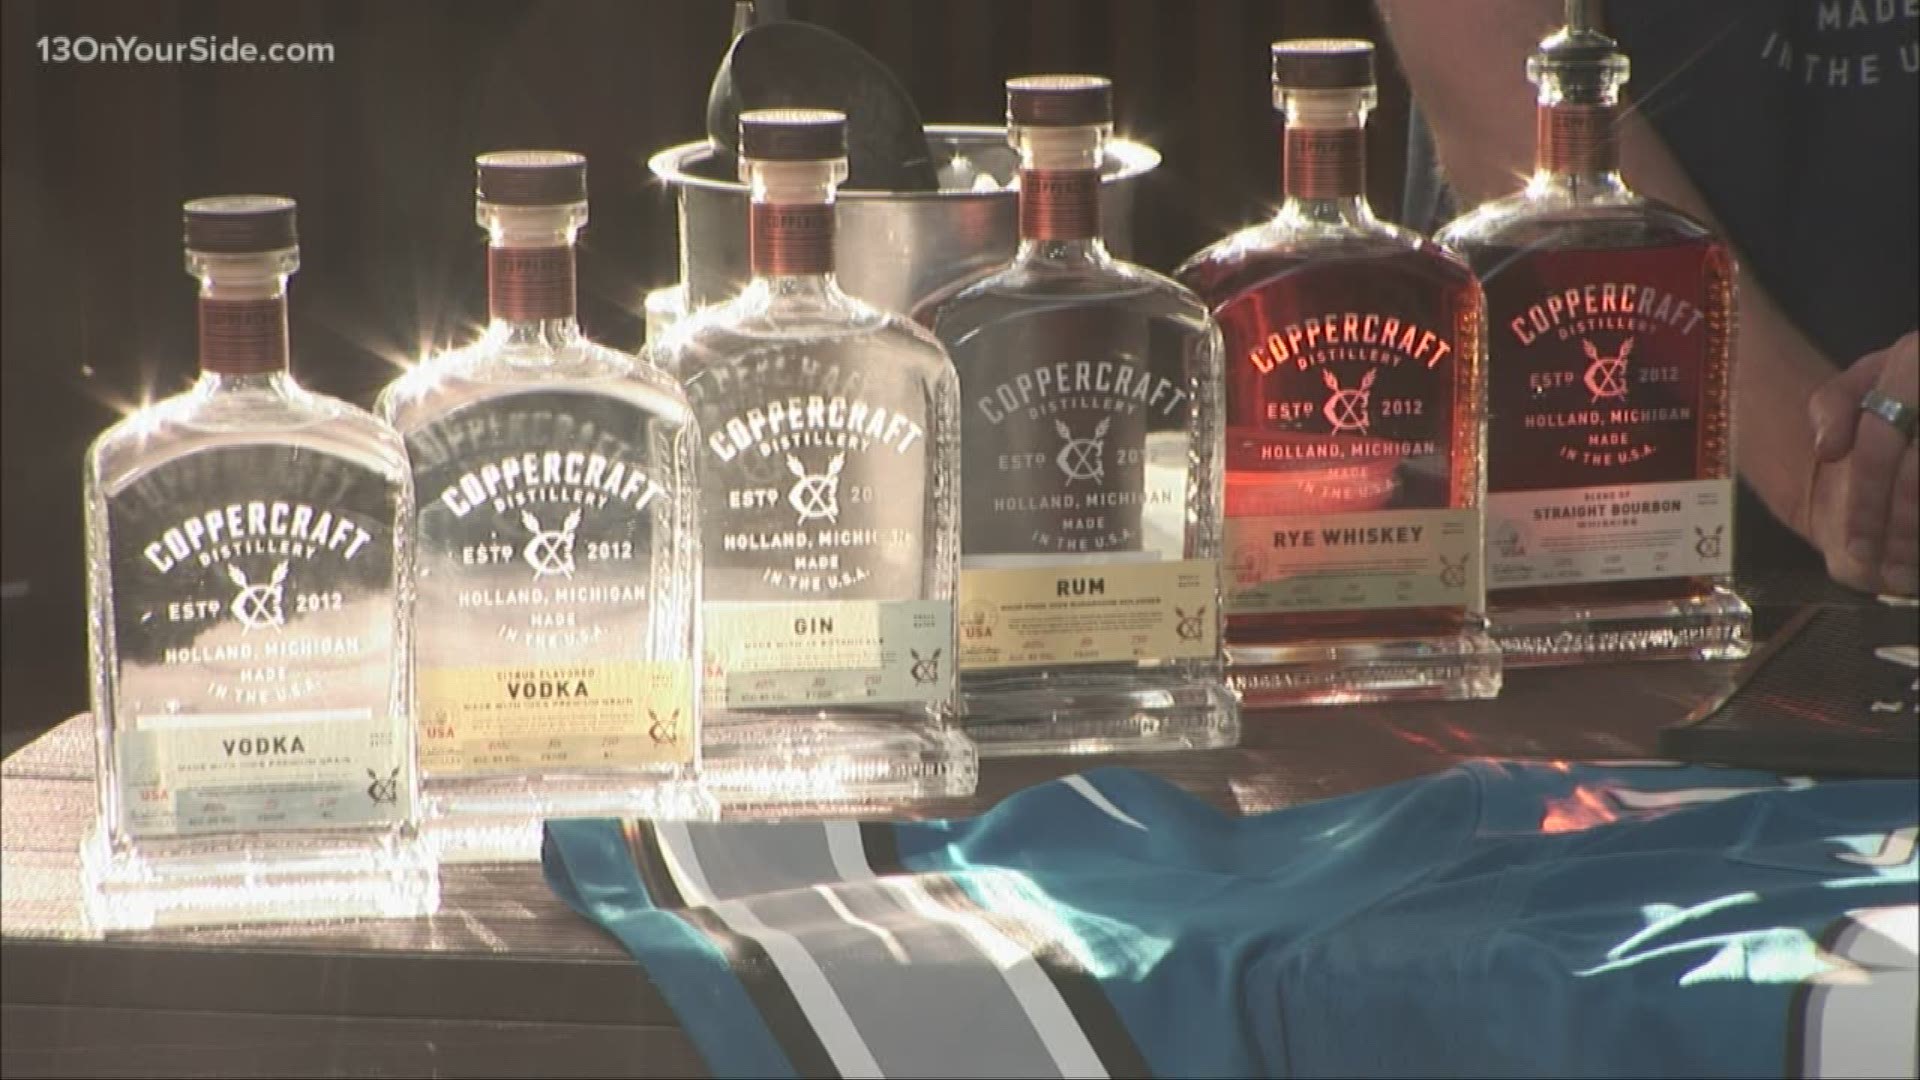 See how Coppercraft Distillery is serving up cocktails to football fans at Ford Field.